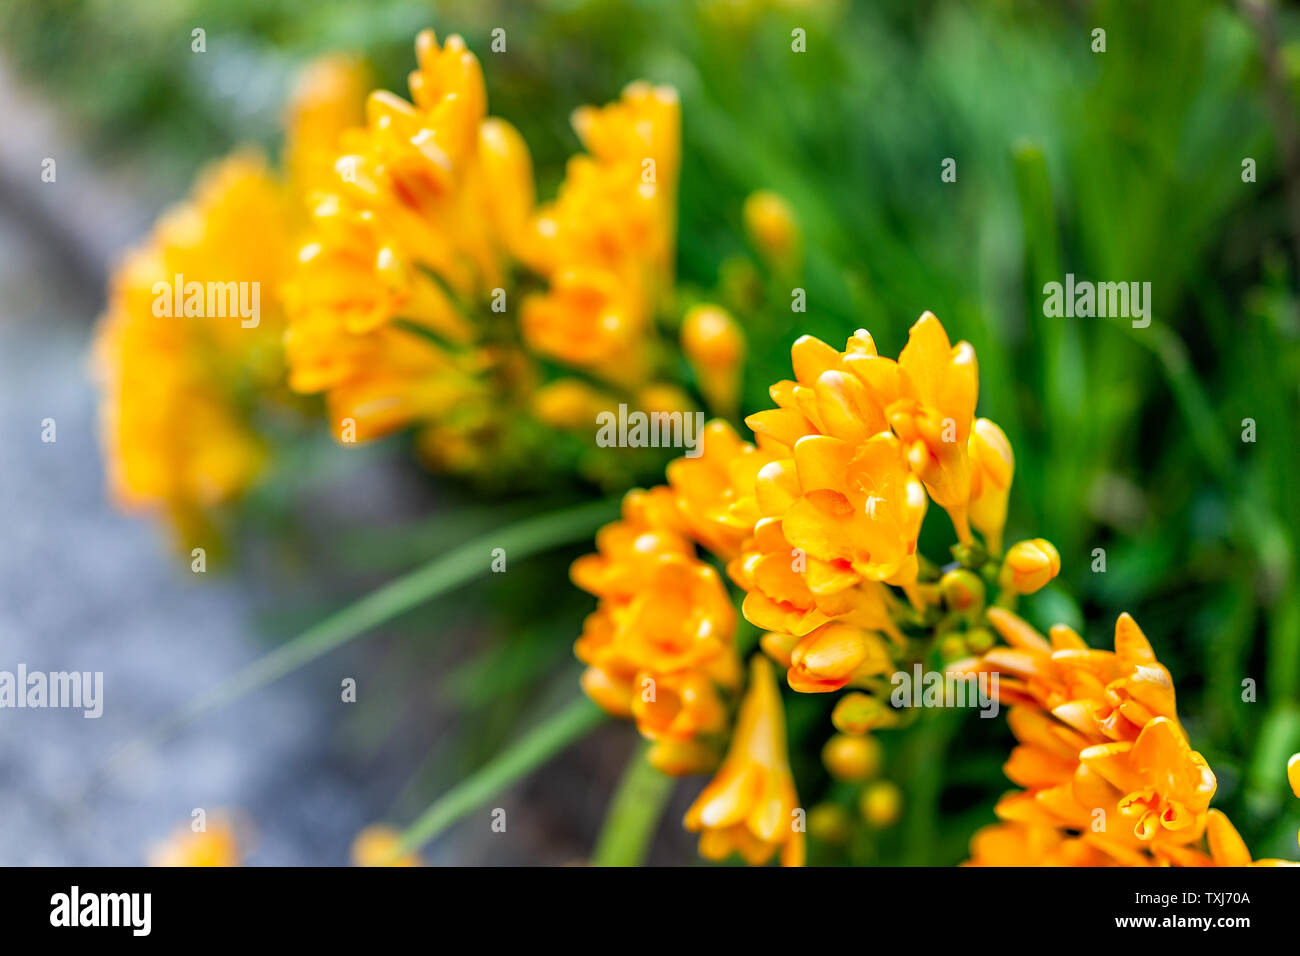 Kyoto, Japan residential area with closeup of yellow freesia flowers in garden and bokeh background Stock Photo